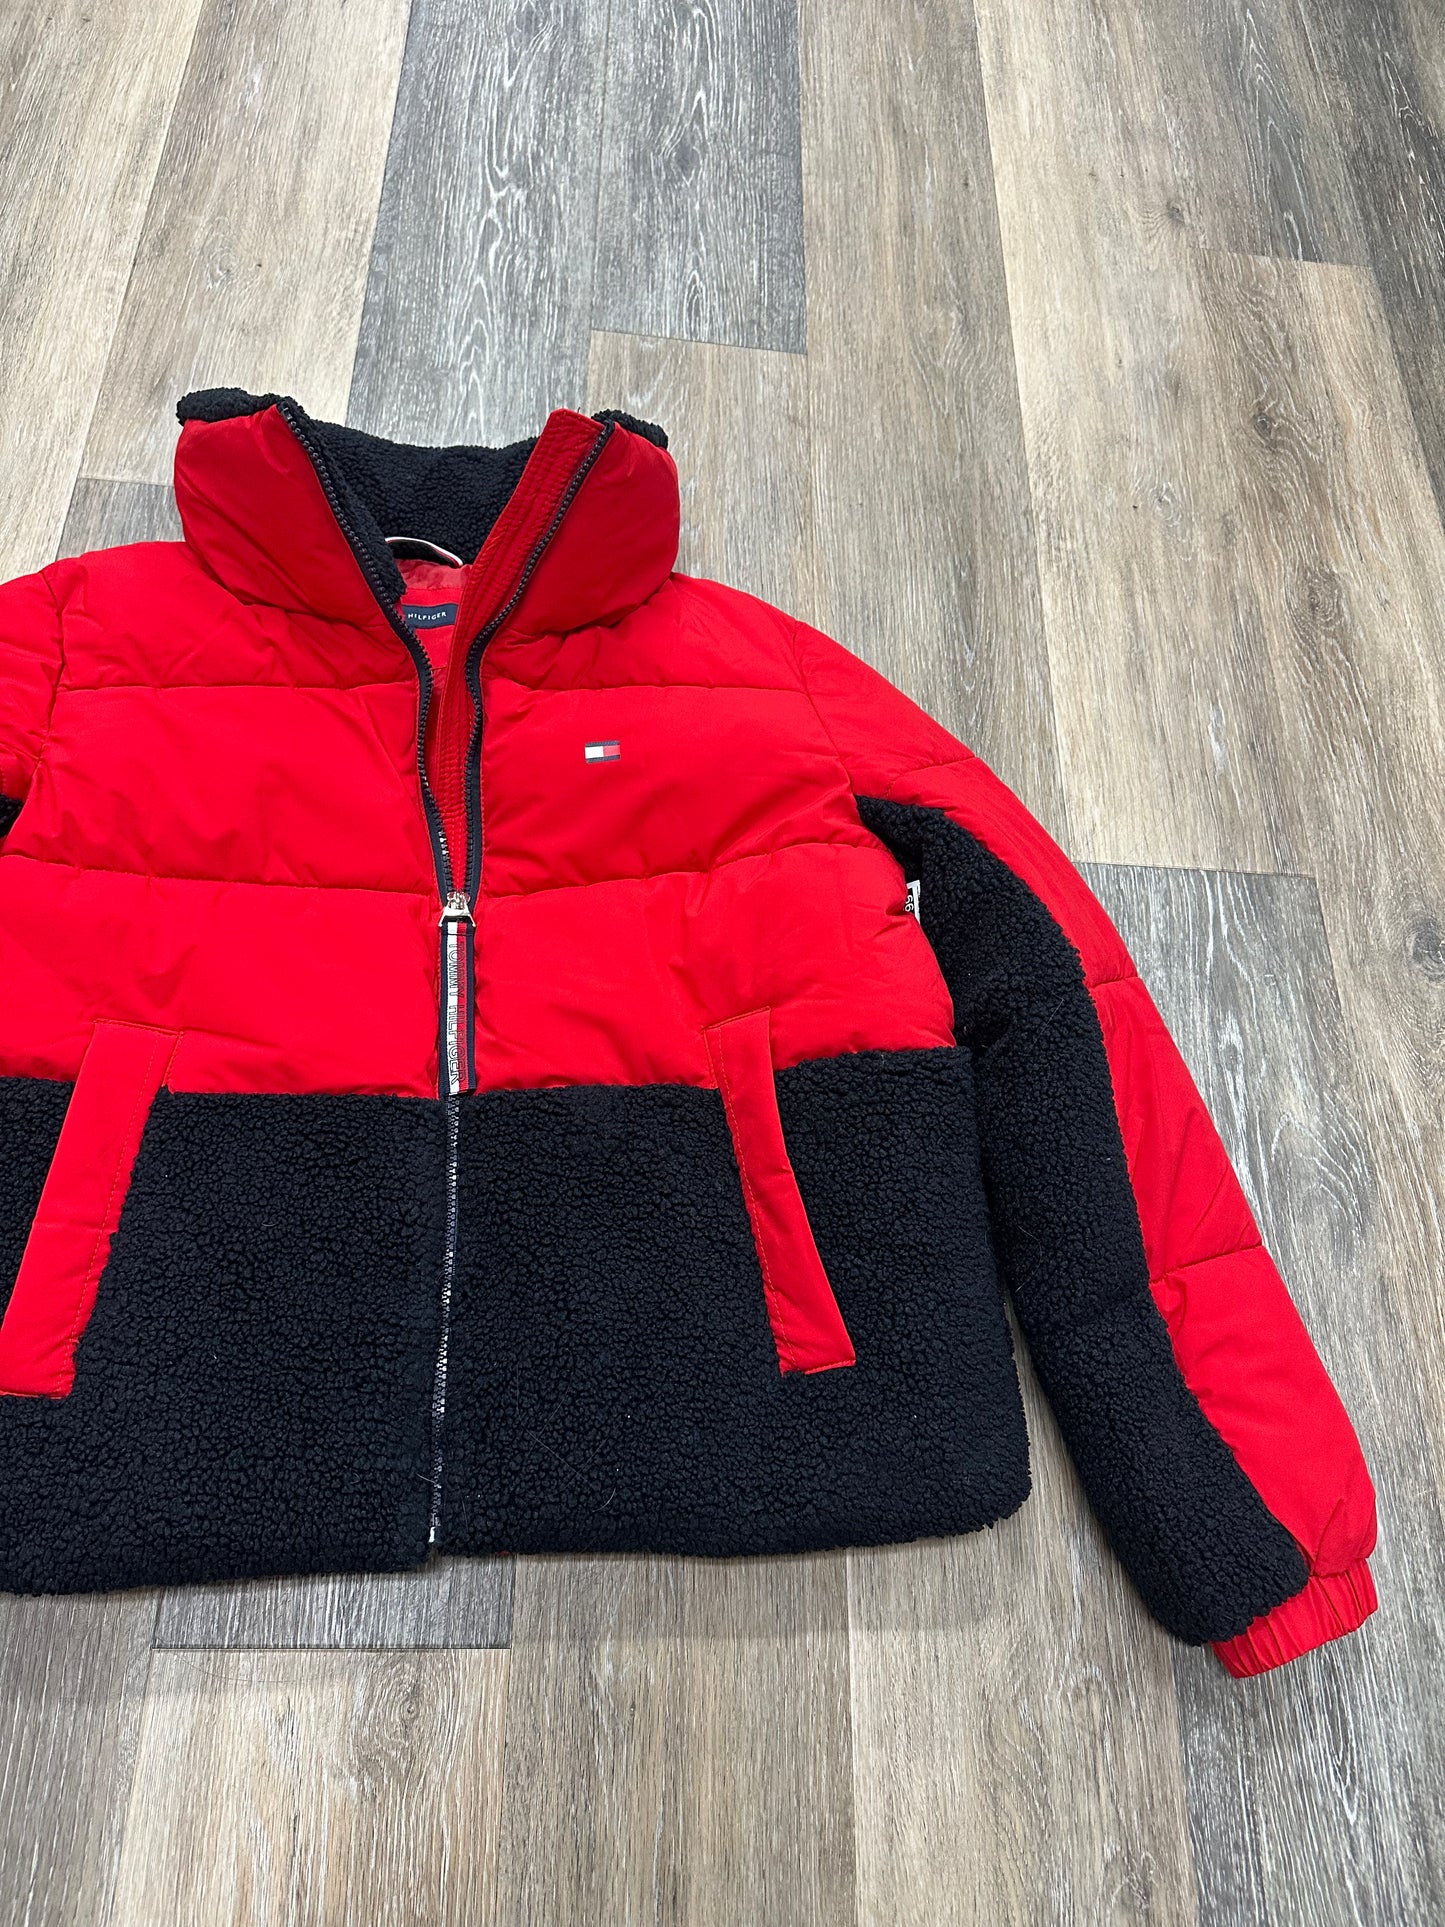 Coat Puffer & Quilted By Tommy Hilfiger  Size: S